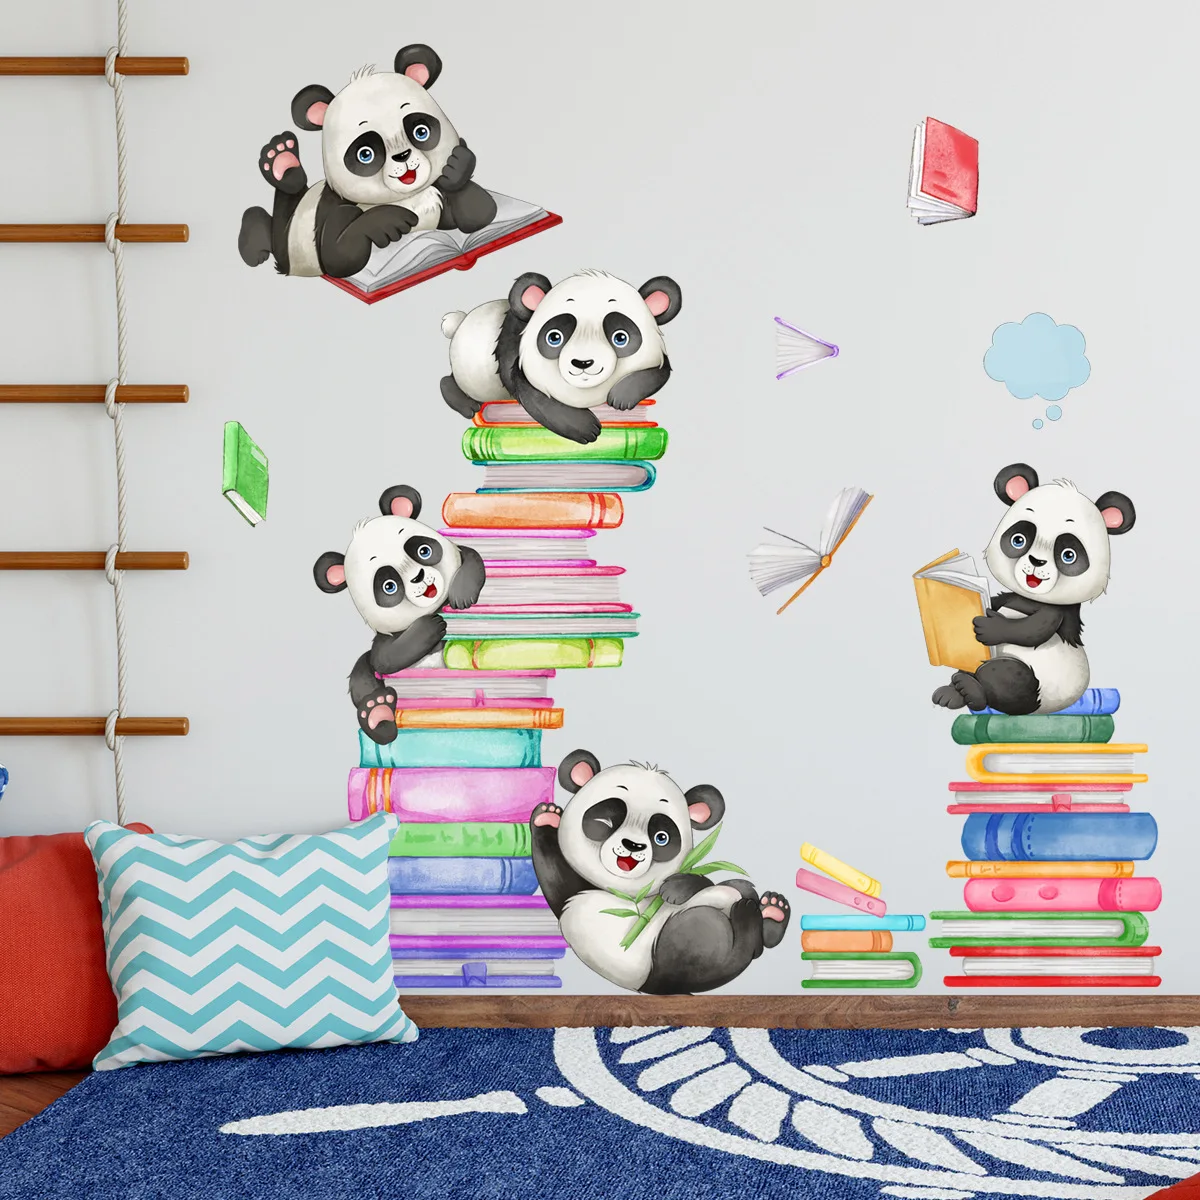 2pcs Animal Panda Book Cartoon Wall Stickers Dormitory Background Wall Home Decoration Wall Stickers Mural Wallpaper Ms6263 5 single color wall decoration paint painting machine without roller brush tool 3d pattern wallpaper decoration painting tools